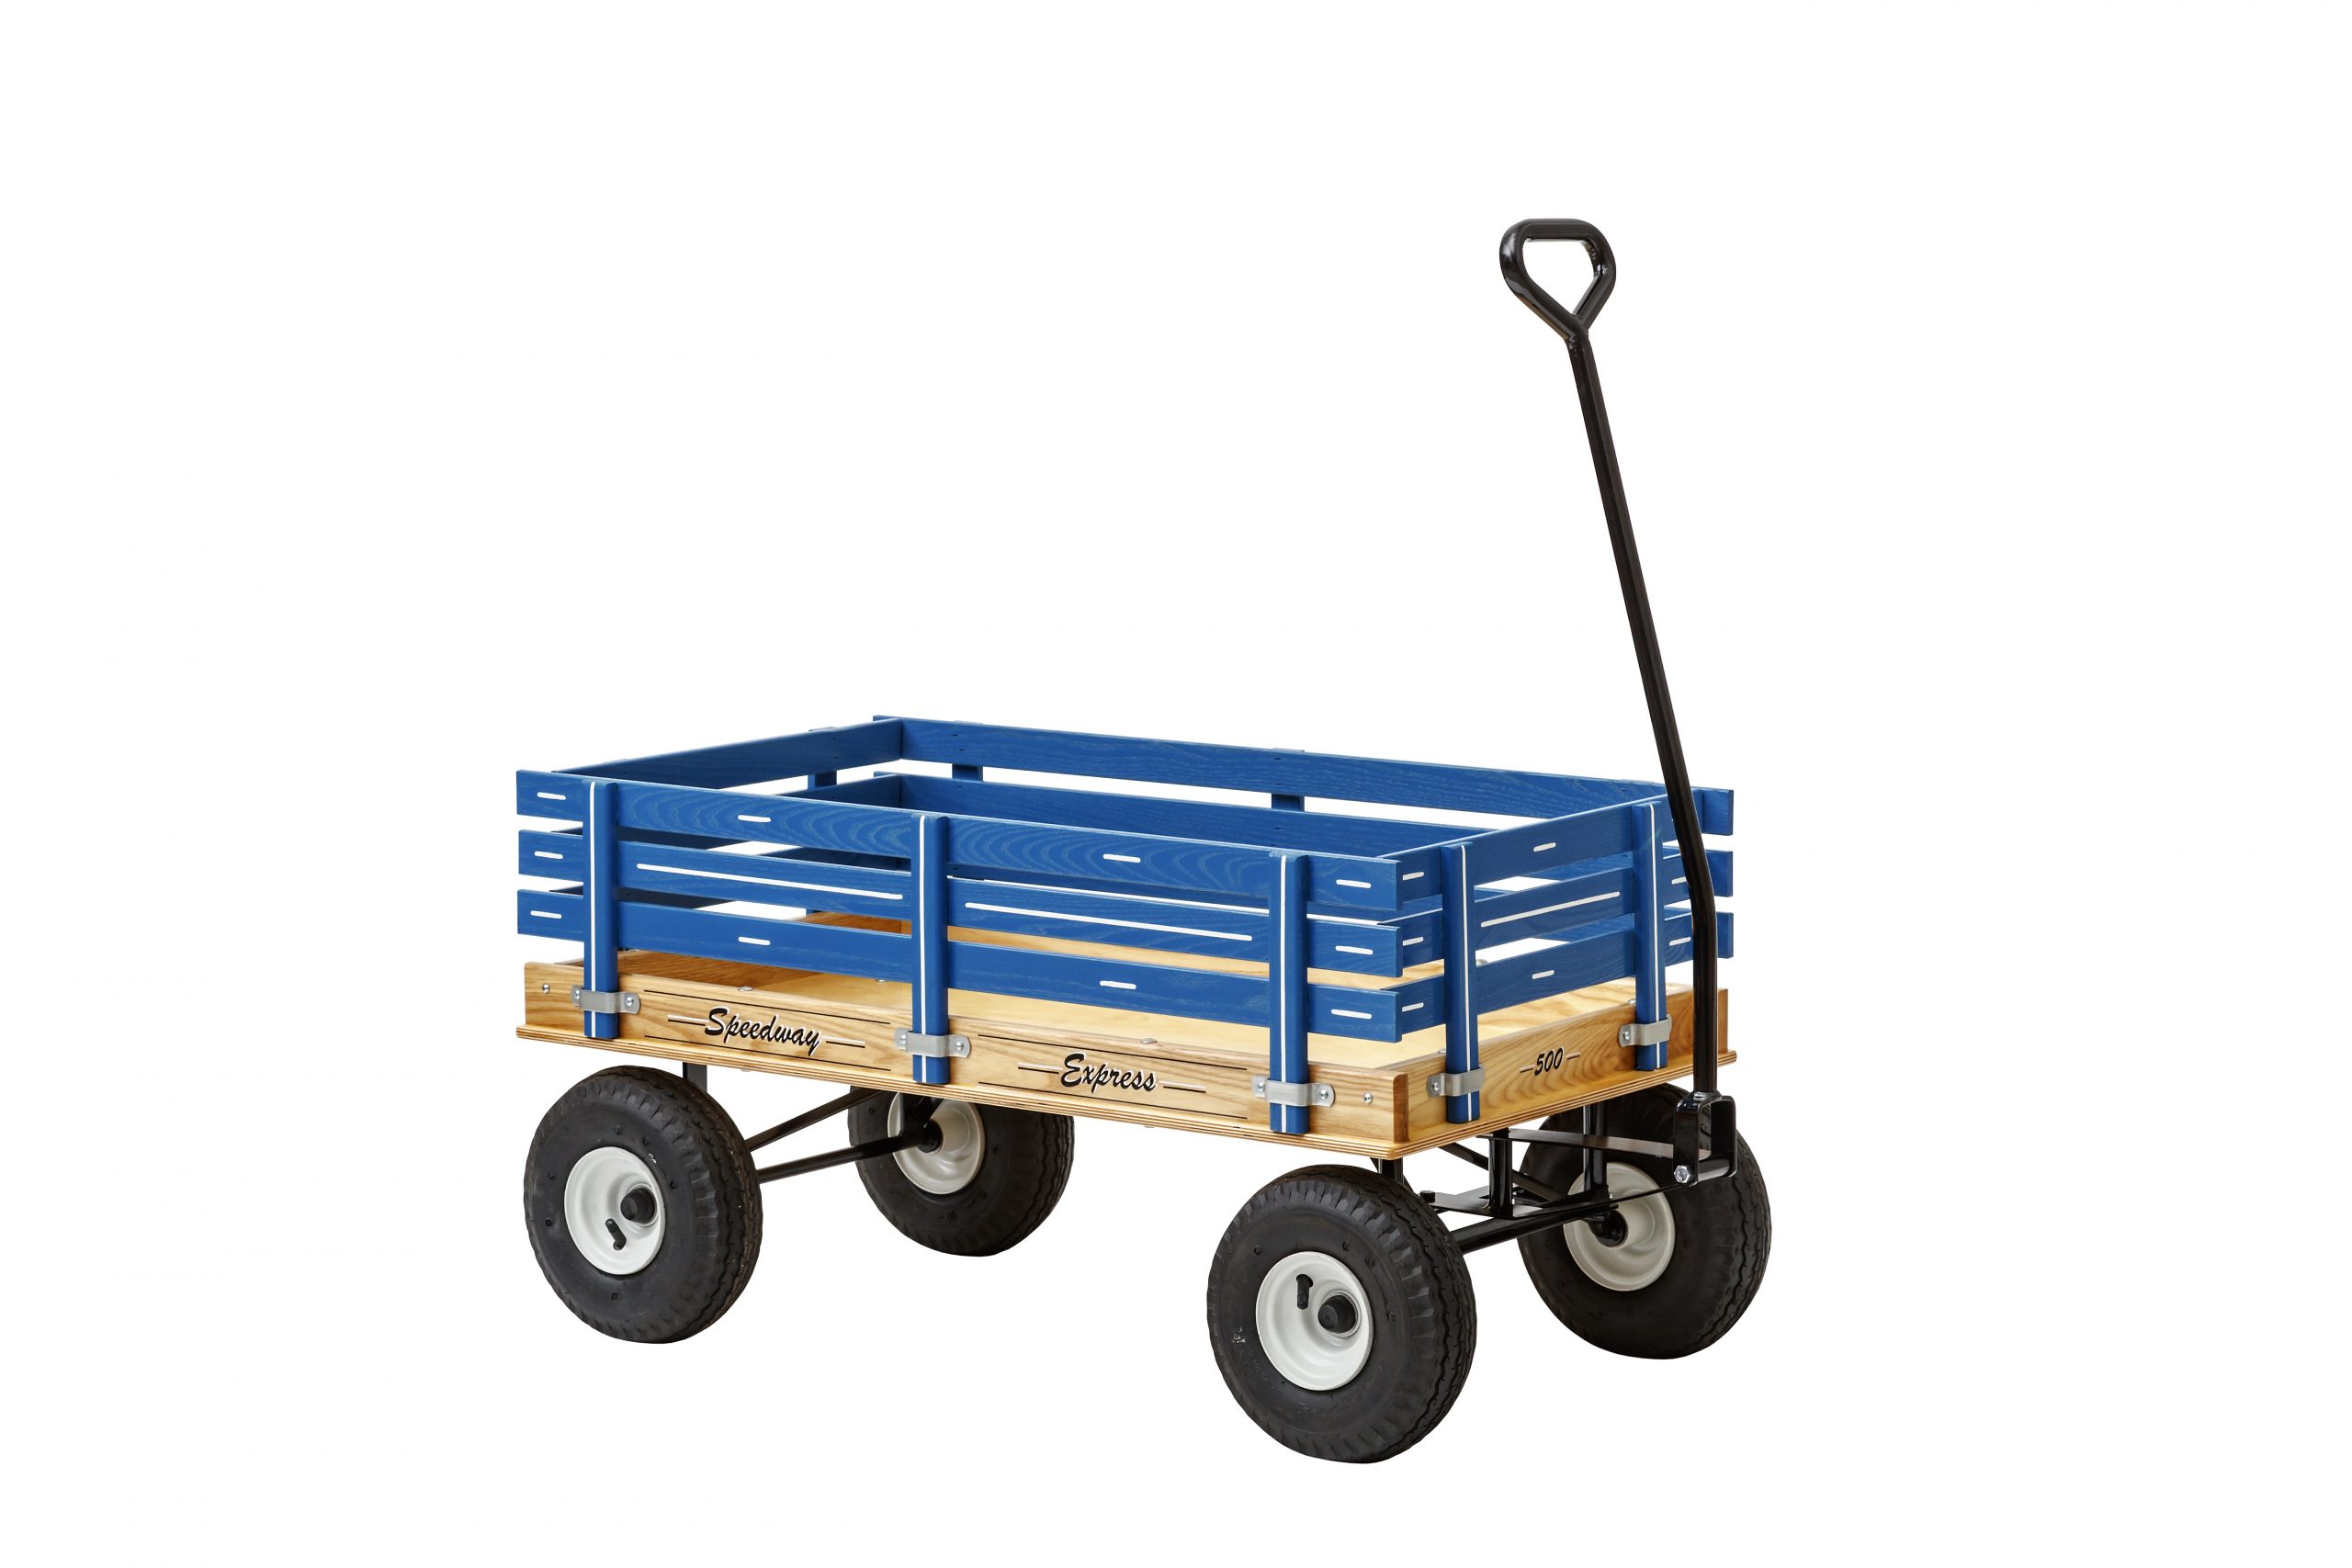 22 x 40 Large Wagon for Kids